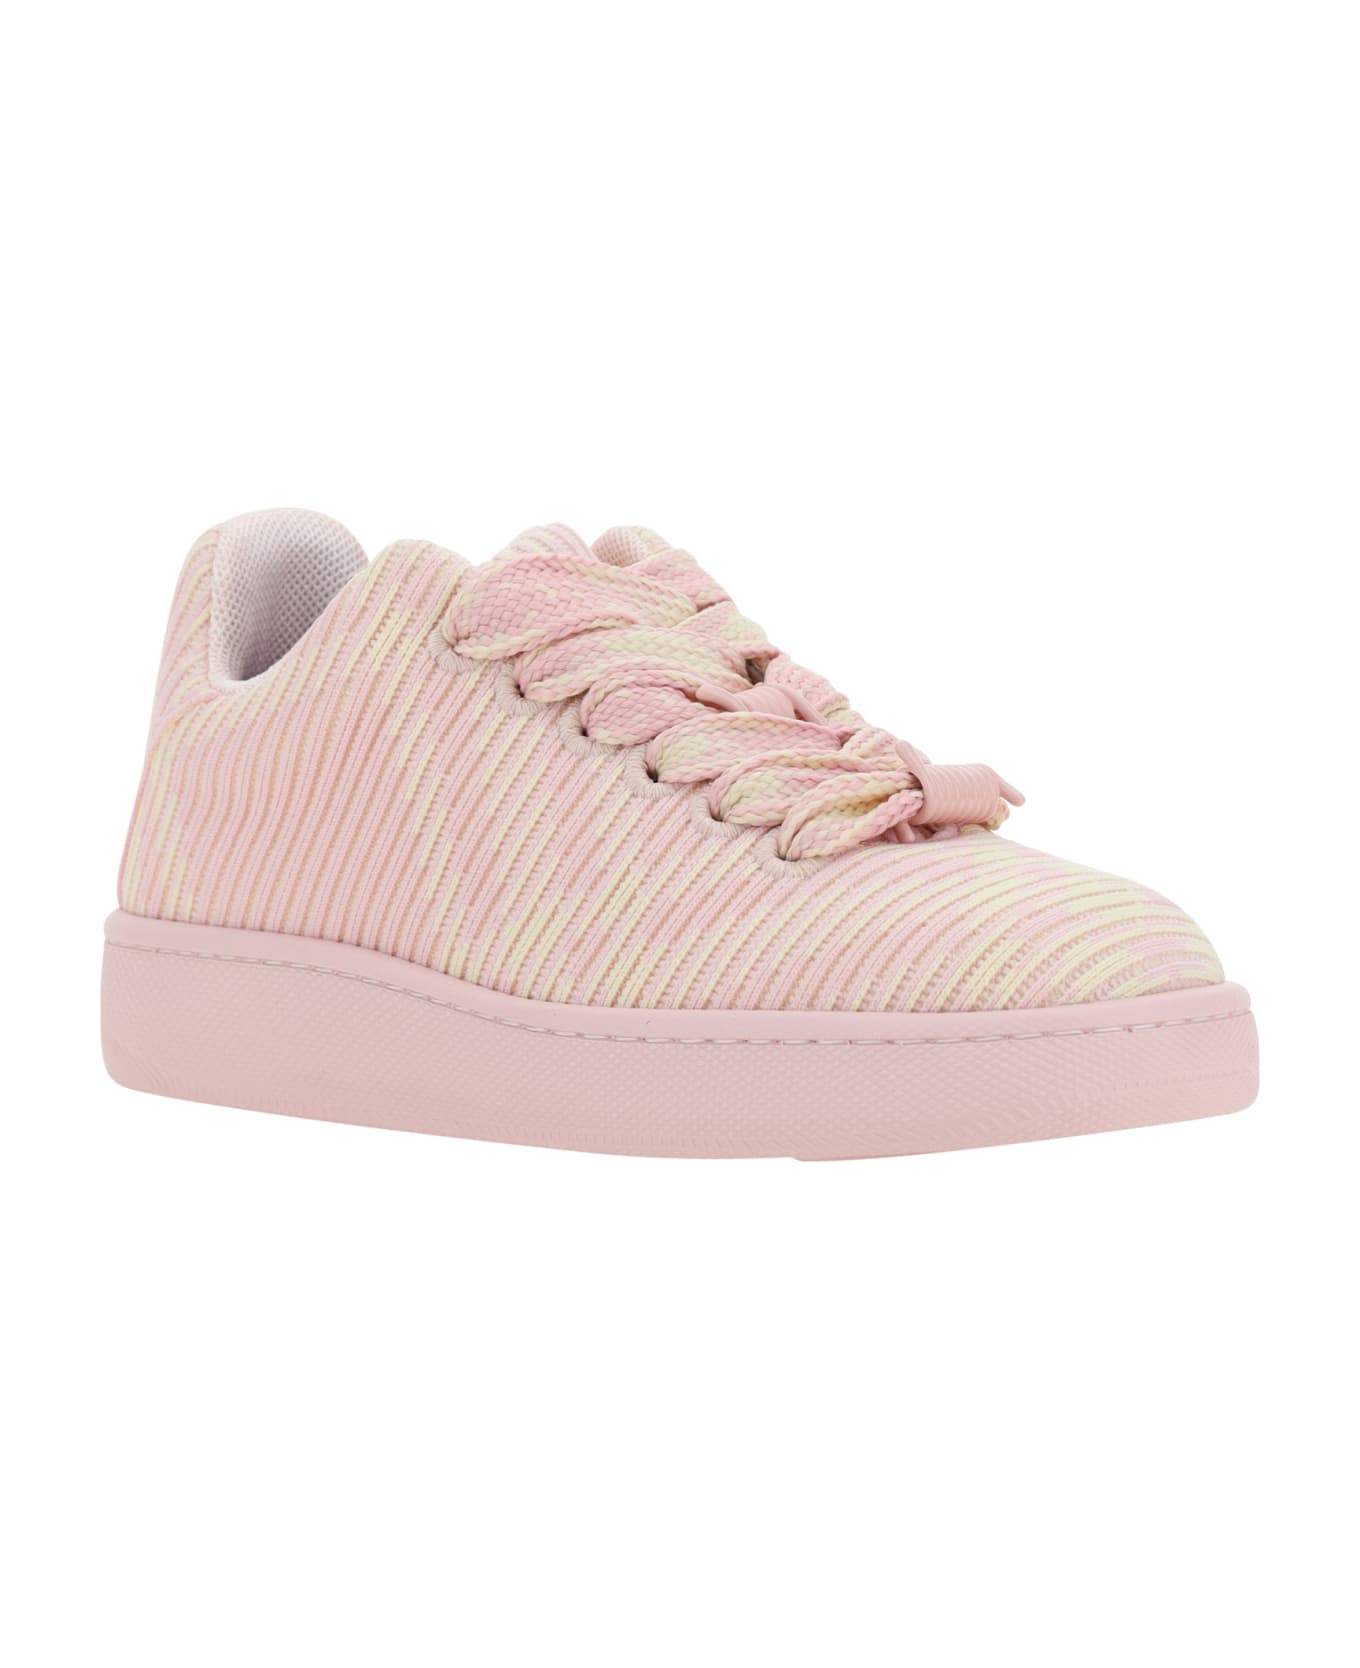 Burberry Embroidered Fabric Box Sneakers - Cameo Ip Check